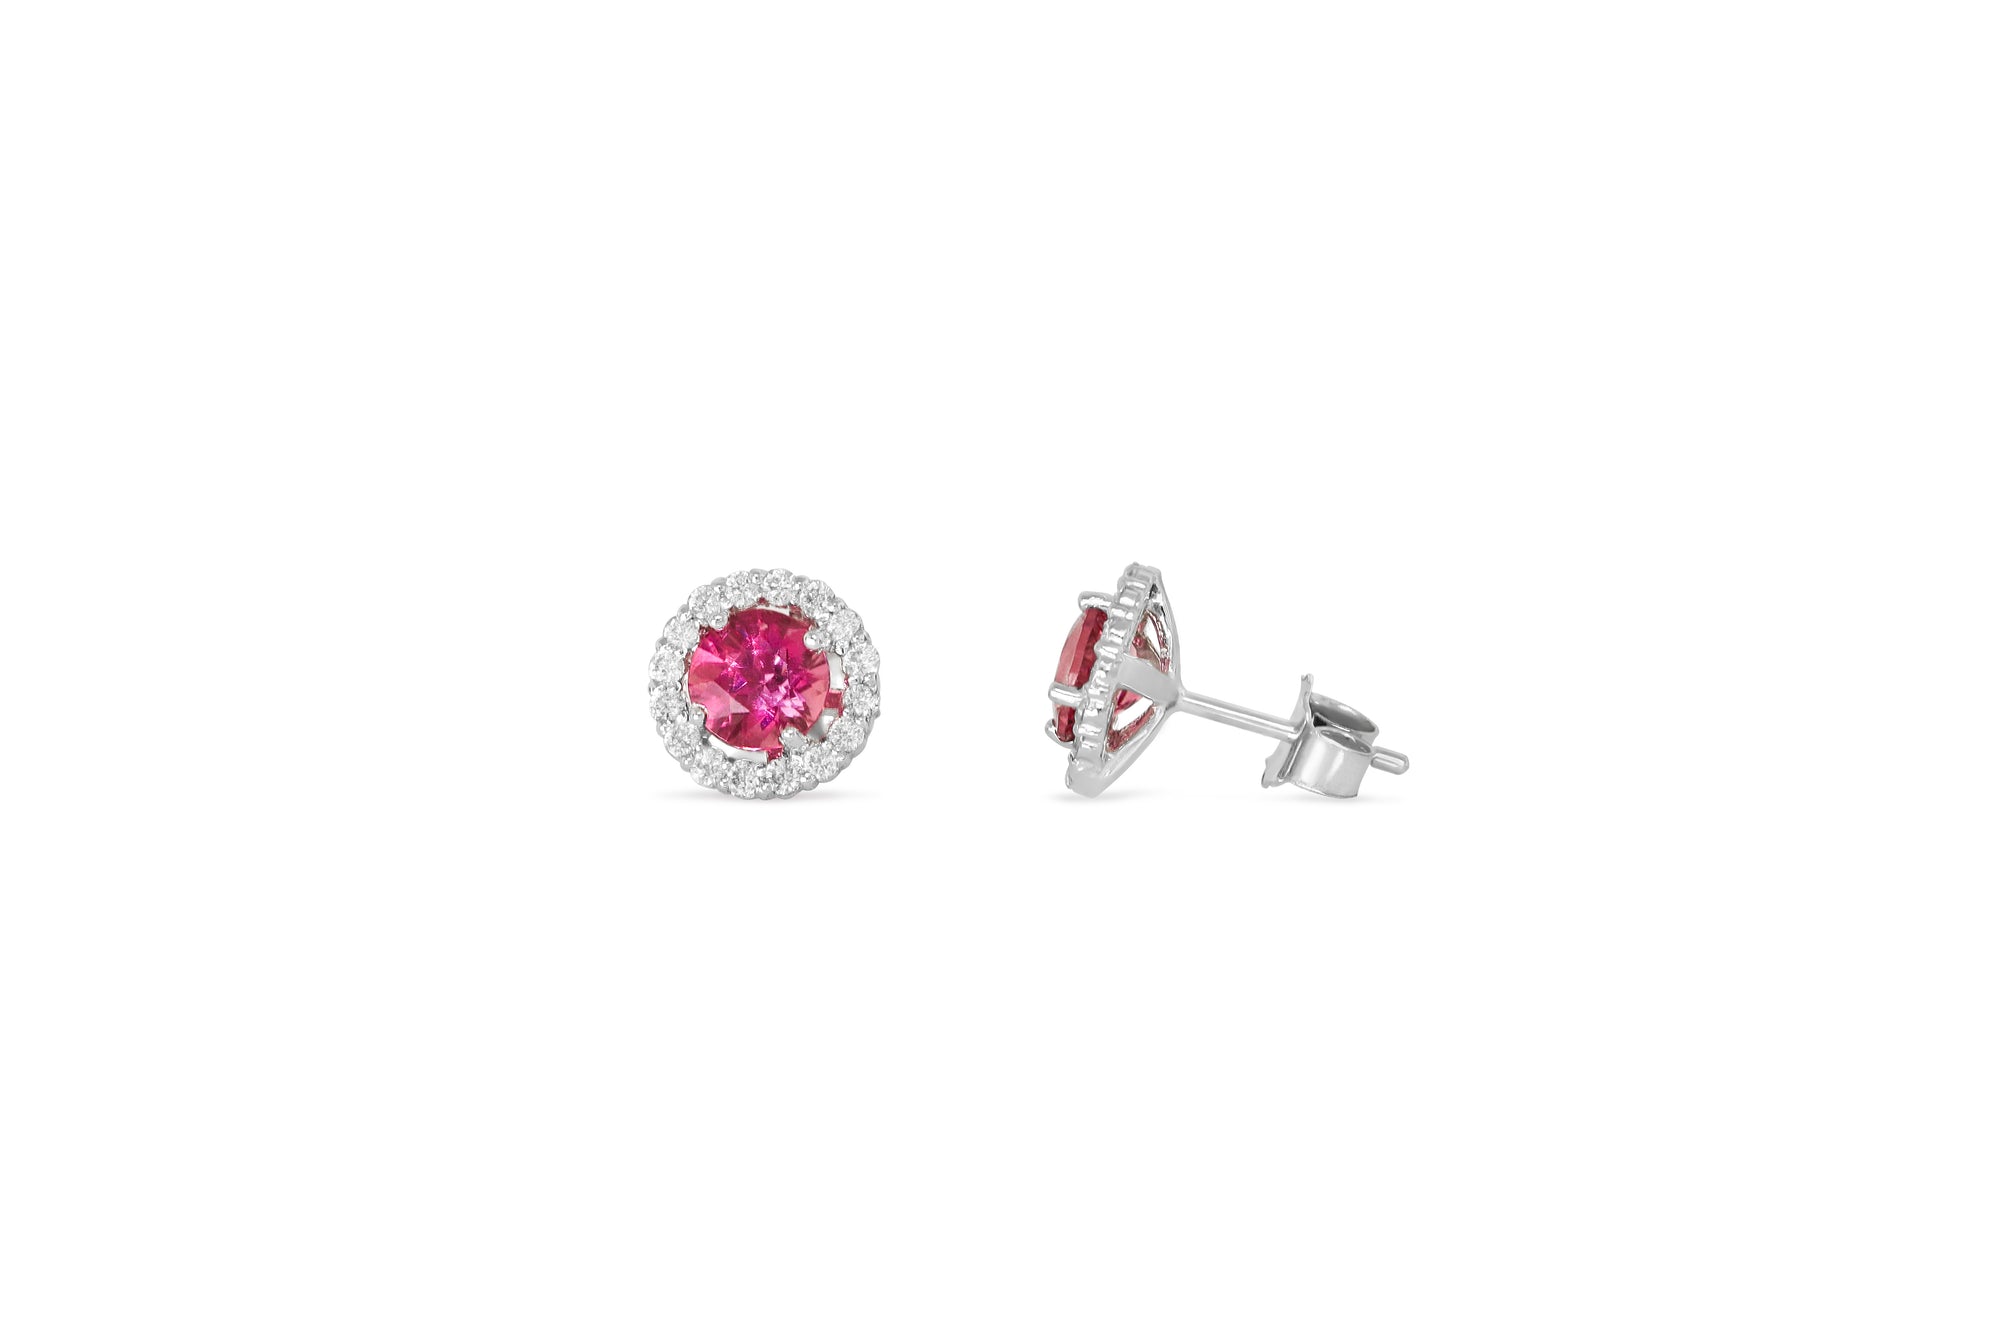 1.20 Pink Tourmaline Diamond Earring 0.35 CT TW Diamonds 14K White Gold PTER001 - NorthandSouthJewelry